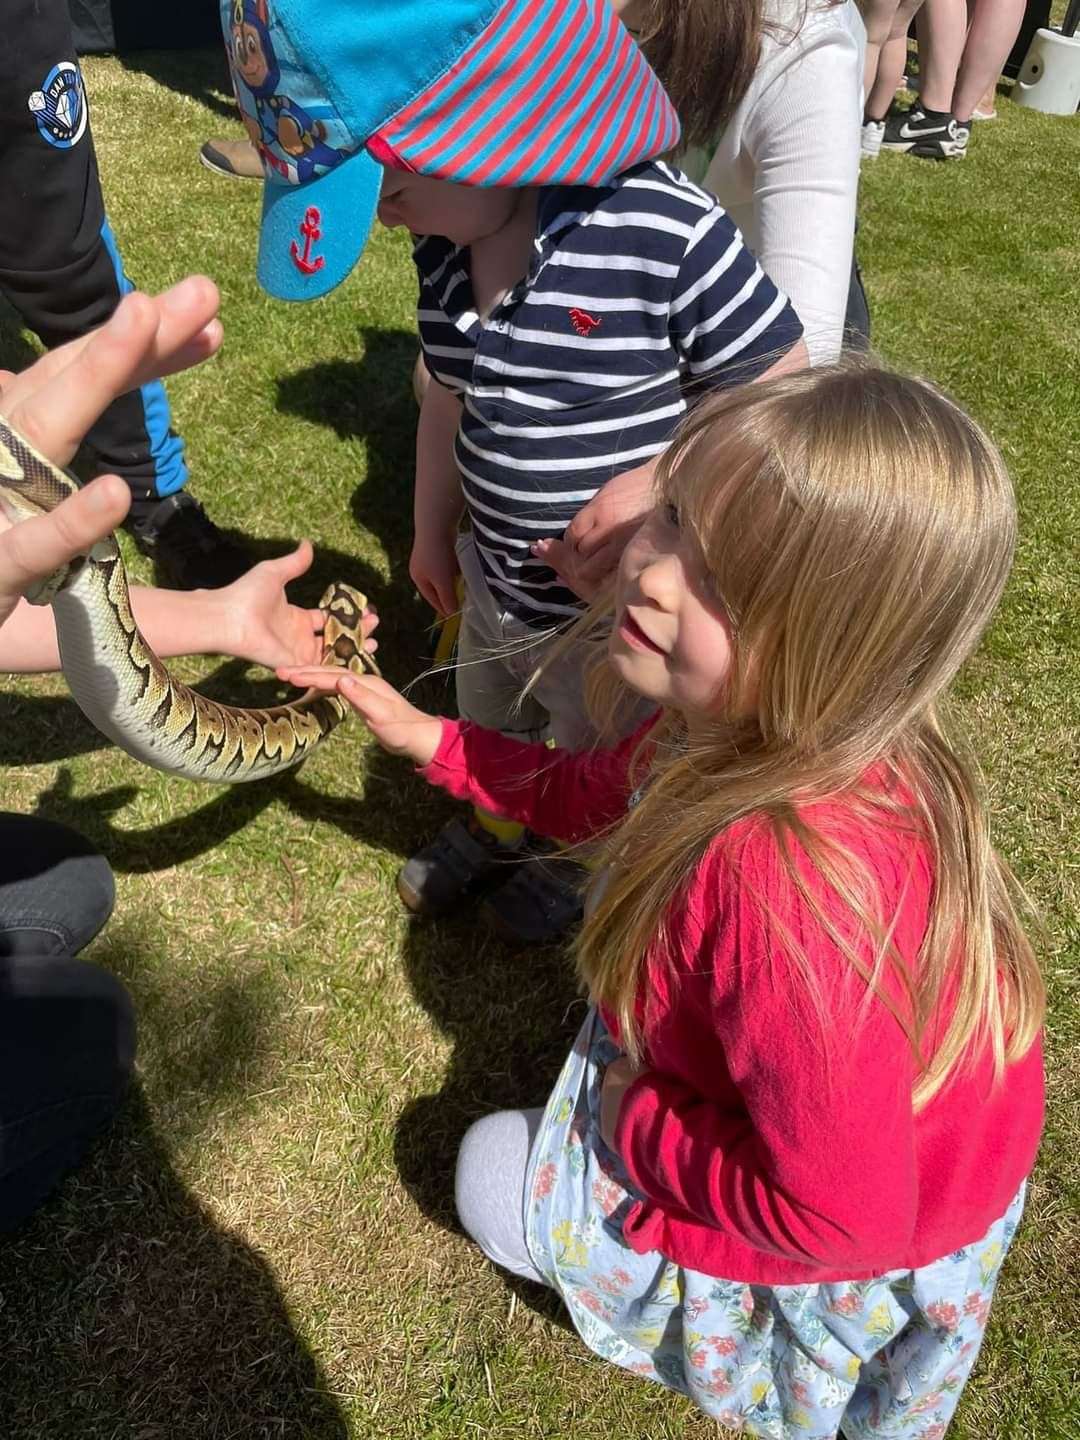 This little lass has no qualms in reaching out to stroke a snake.